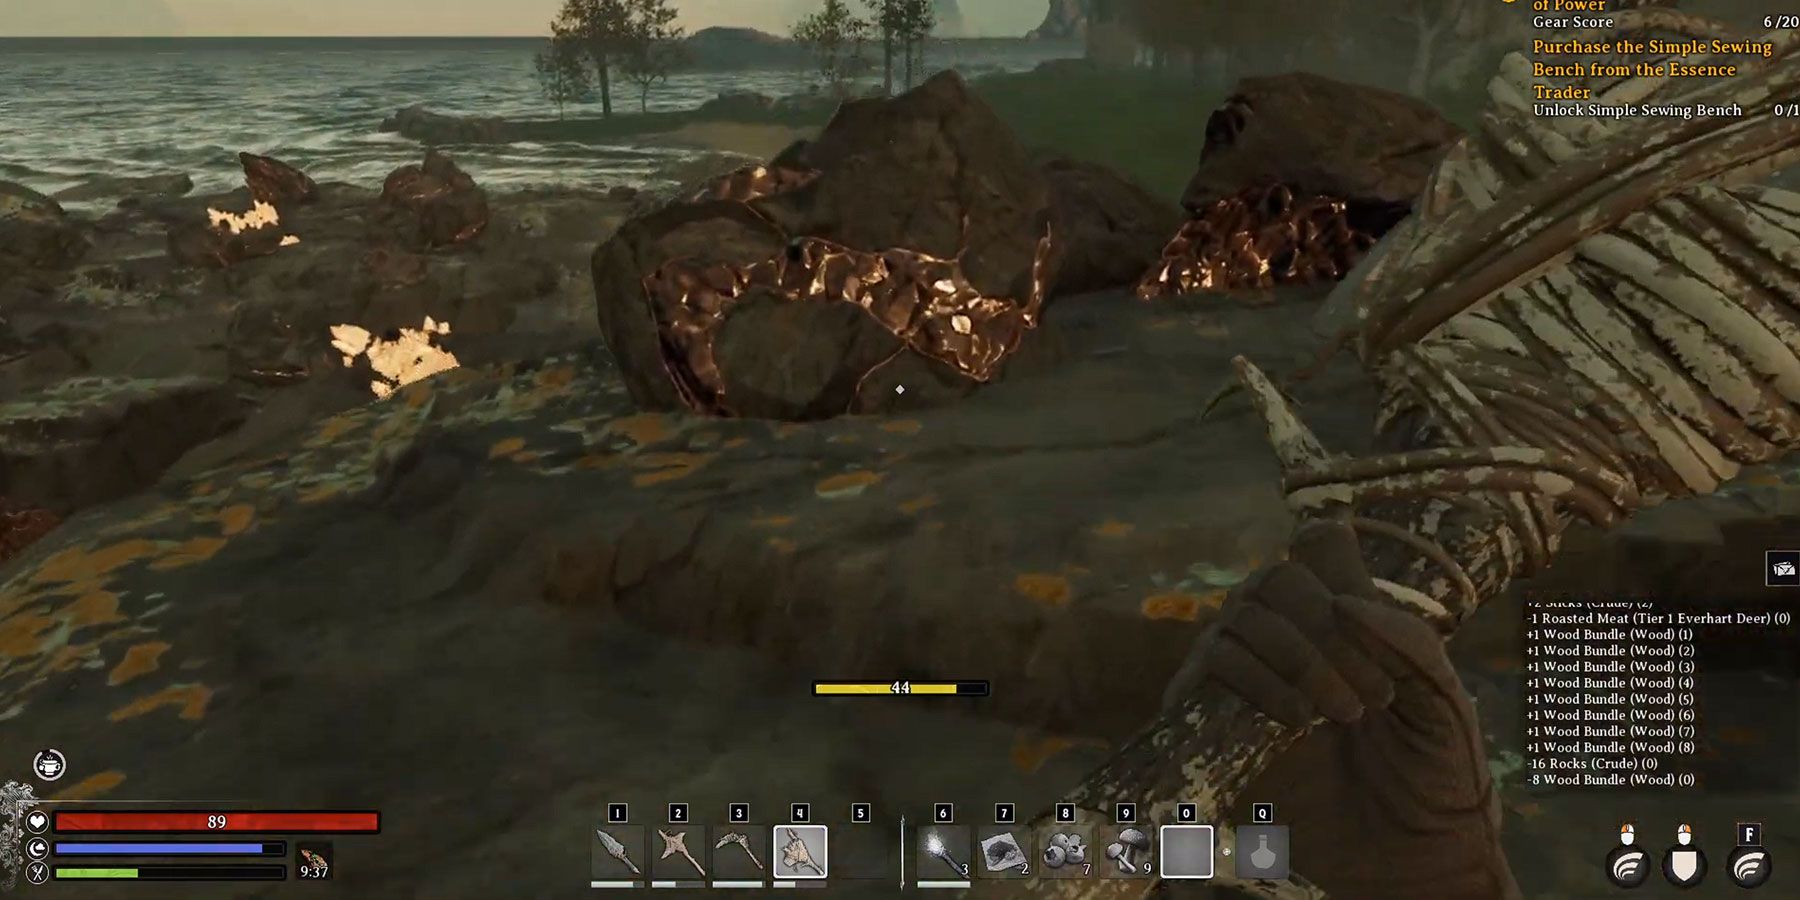 Ore deposits found in large stones in Nightingale.